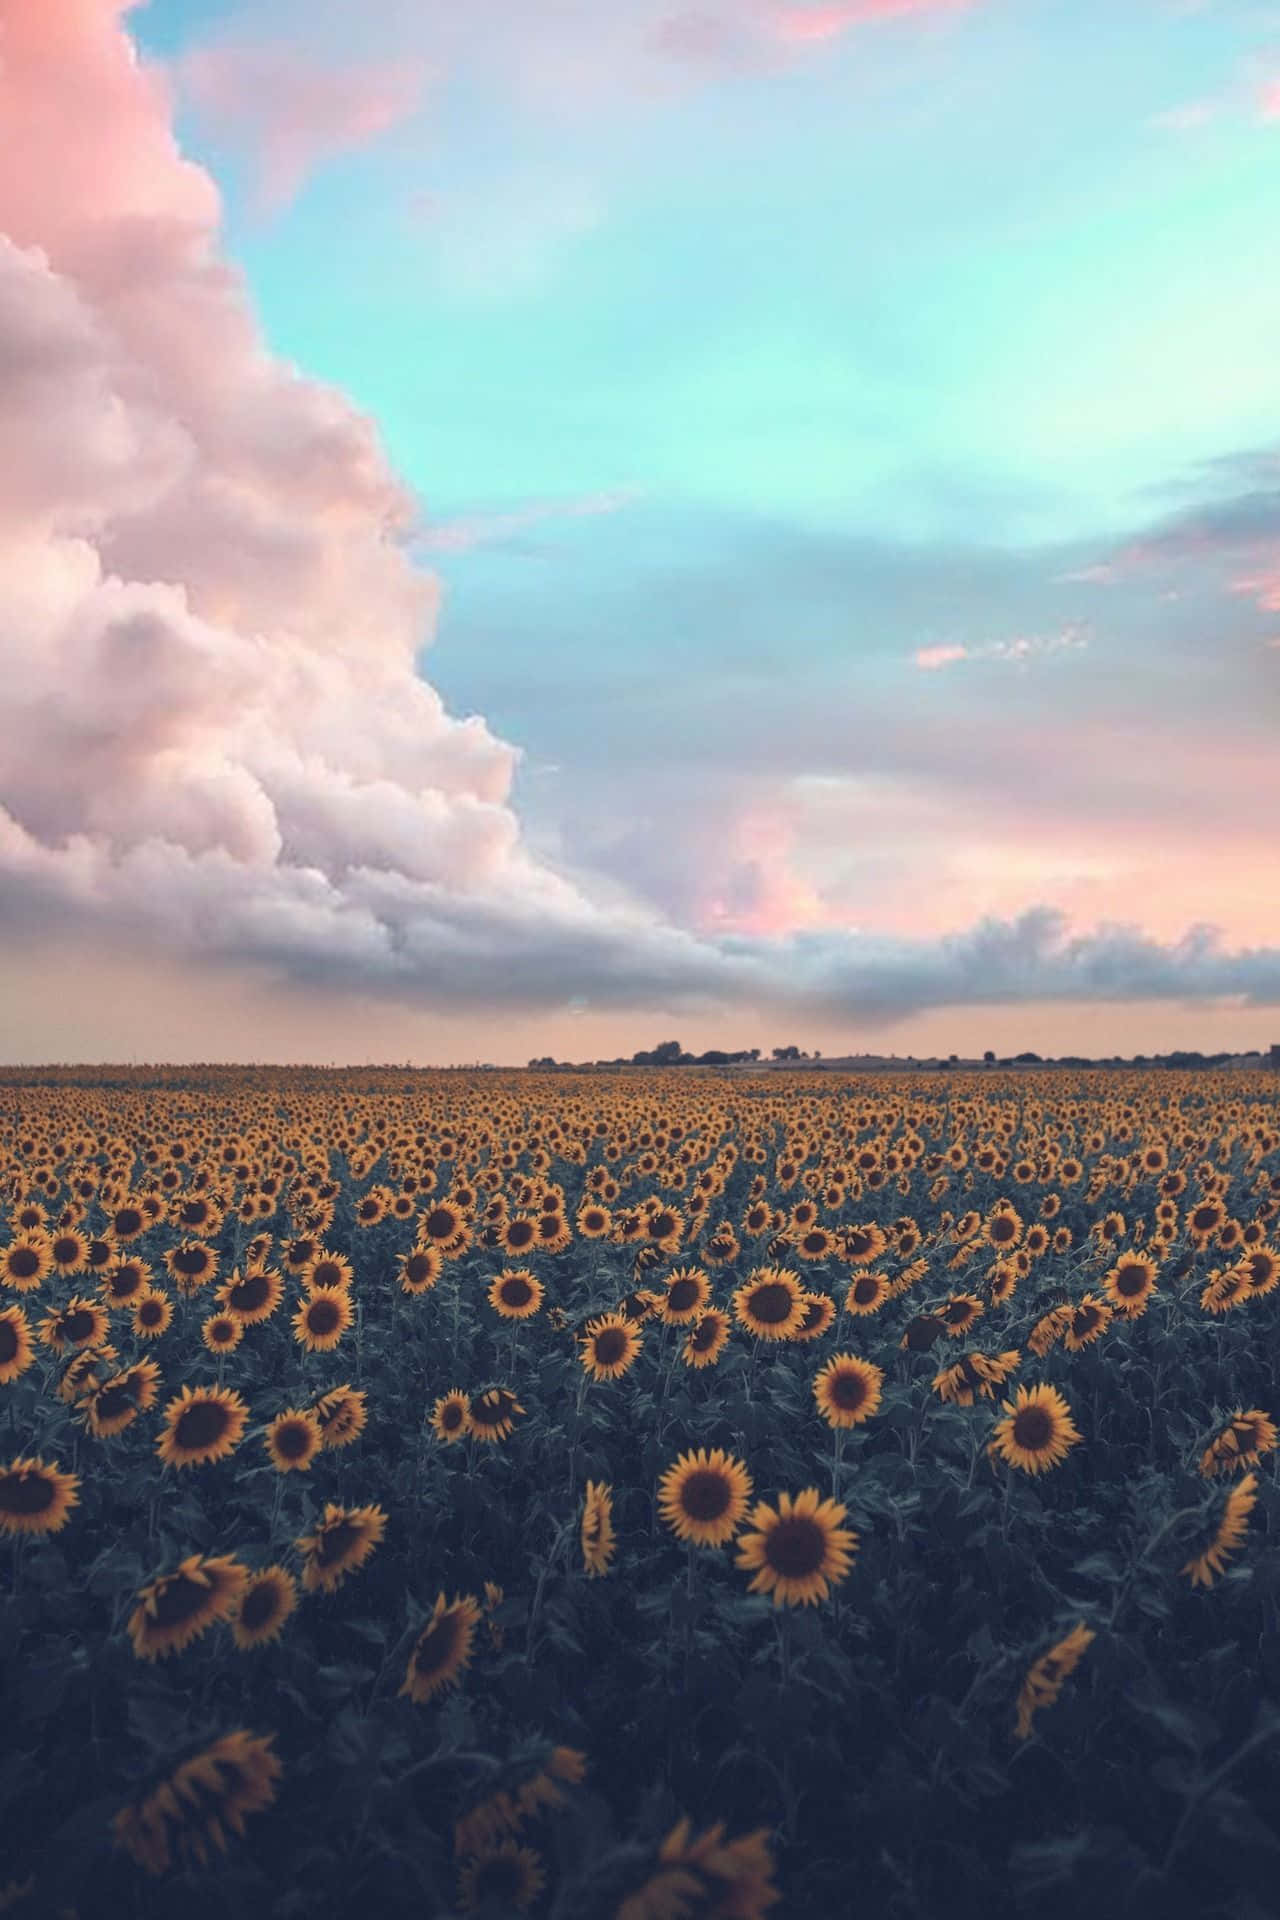 Aesthetic Nature With A Sunflower Field